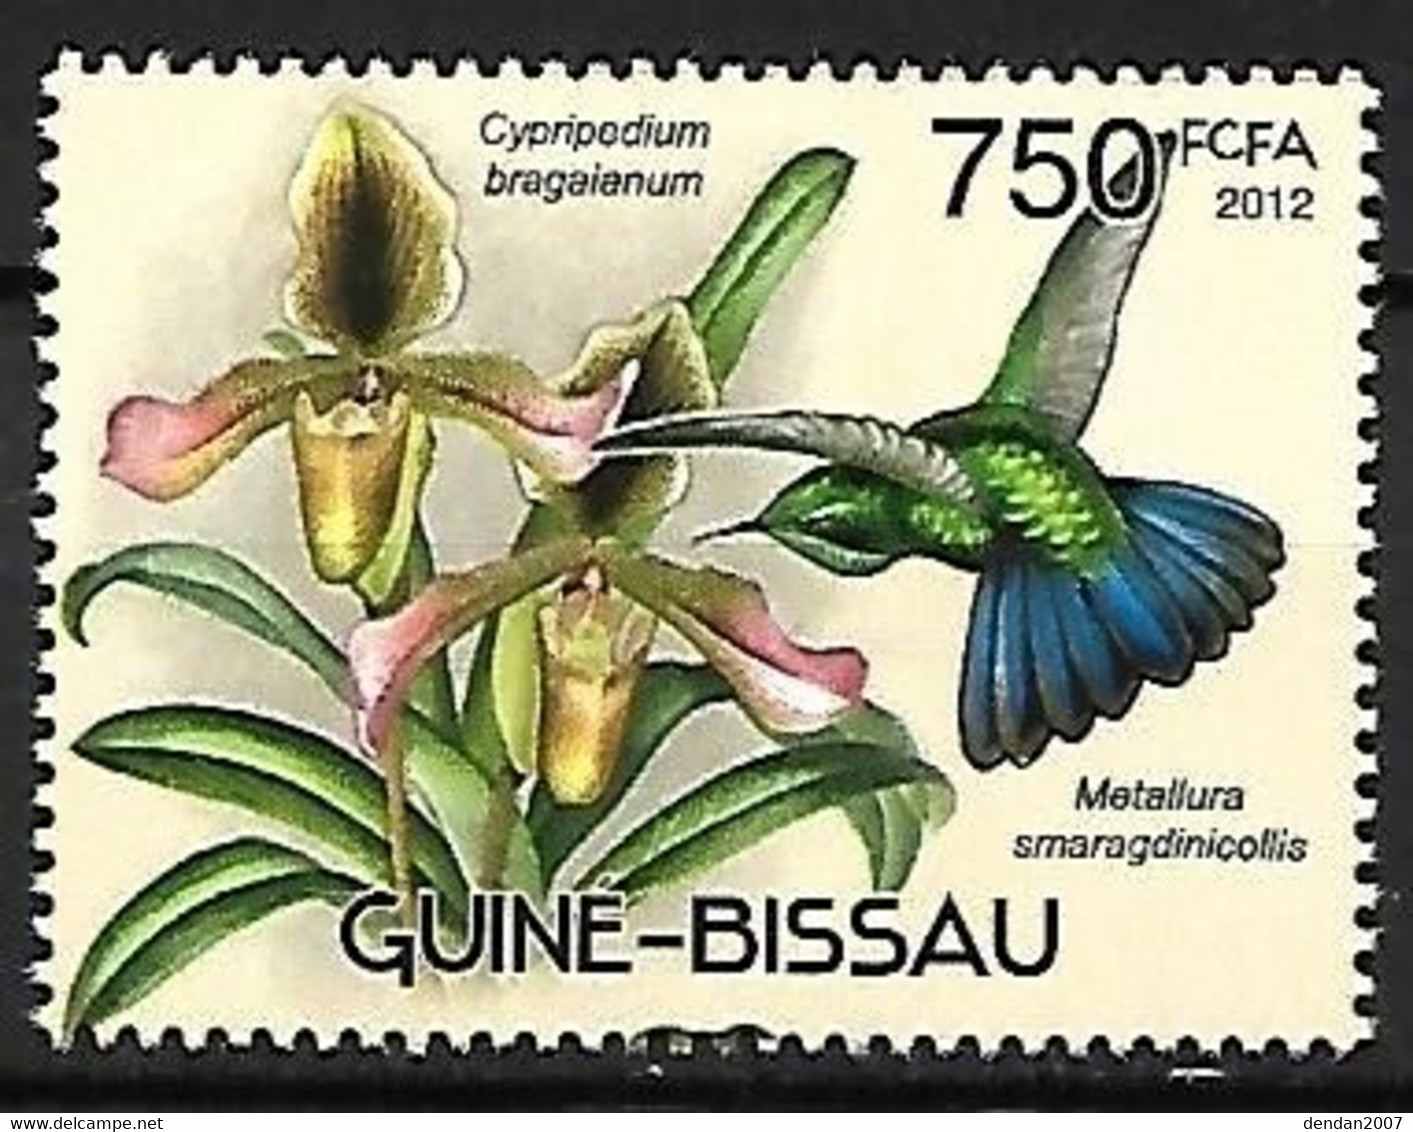 Guinea Bissau - MNH ** 2012 : Hummingbirds And Orchids : Tyrian Metaltail   - Metallura Tyrianthina - Kolibries